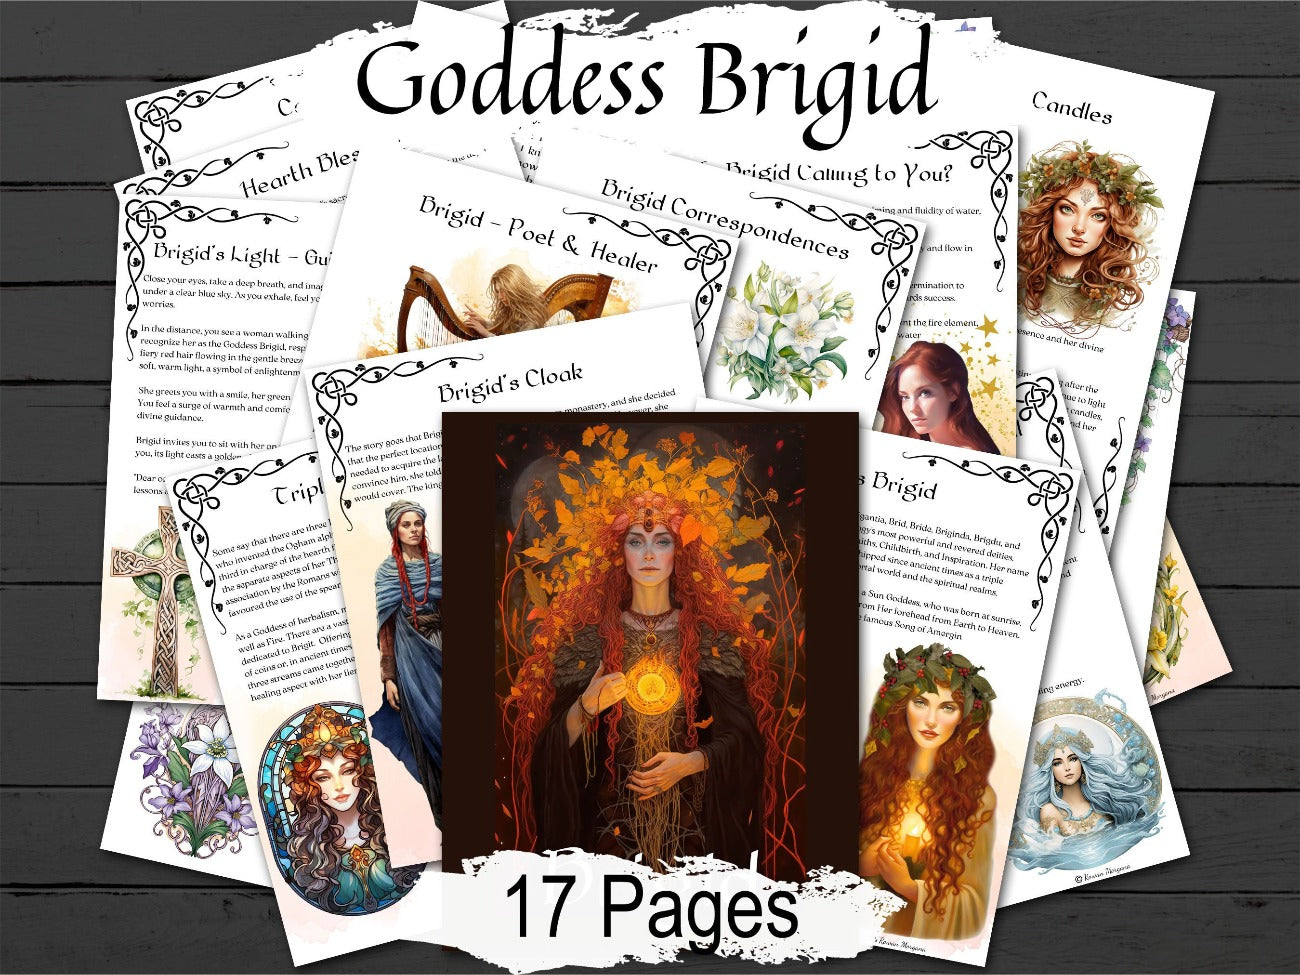 GODDESS BRIGID, 17 pages, Printable Celtic Goddess of Fire, Poetry, Healing, Spellbook Guide, Imbolc Magic, Divine energy & Sacred Knowledge - Morgana Magick Spell